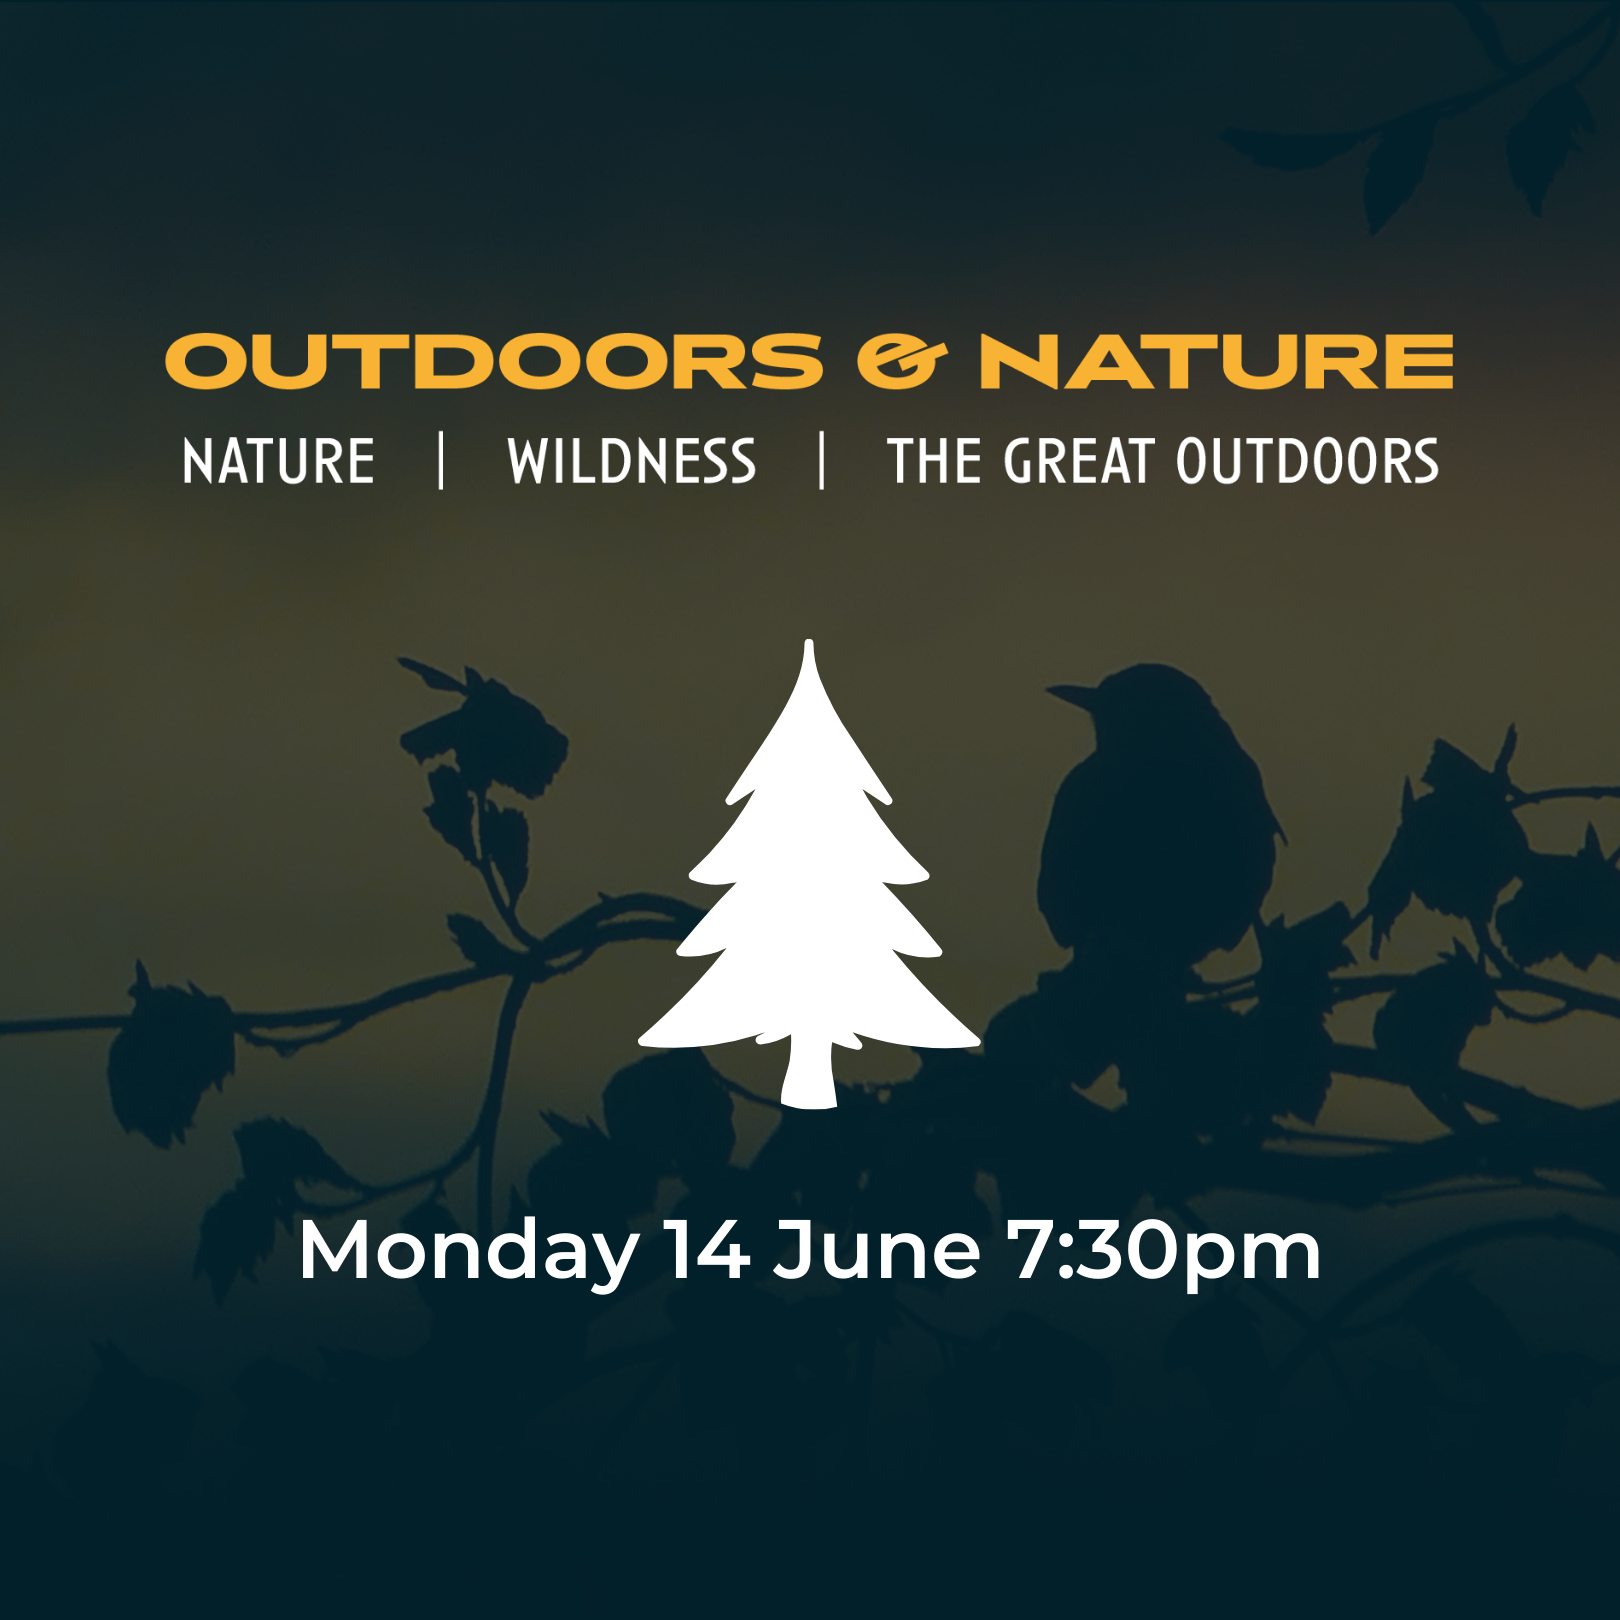 Zoom details:  outdoors and nature workshop monday 14 june 7:30pm